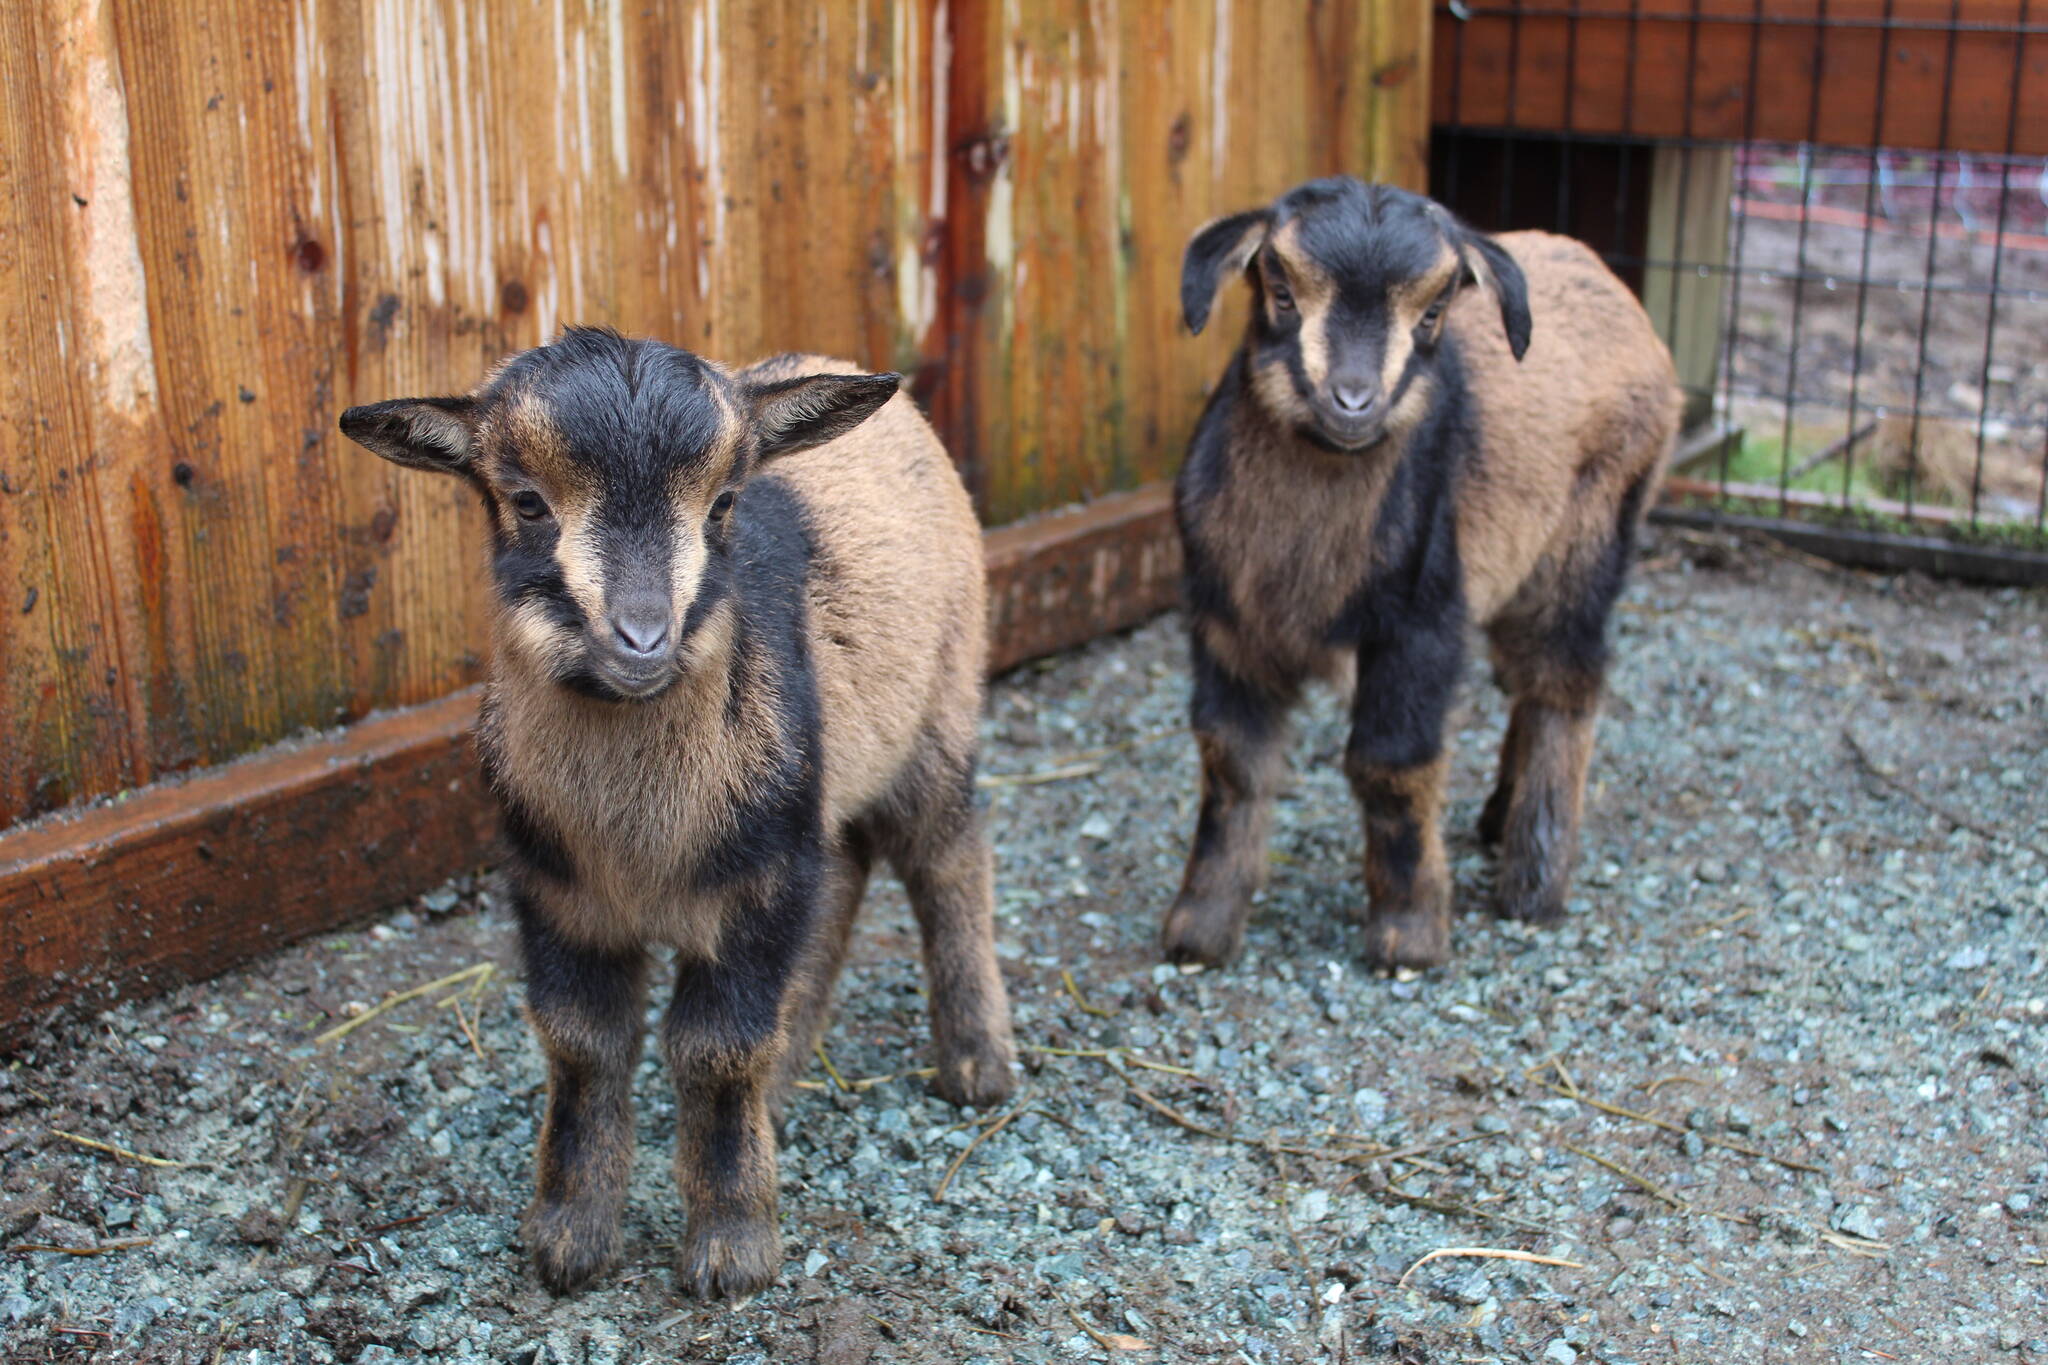 San Clemente Island goats are distinct from other breeds in their size, coloring and deer-like movements. (Photo by Karina Andrew/Whidbey News-Times)